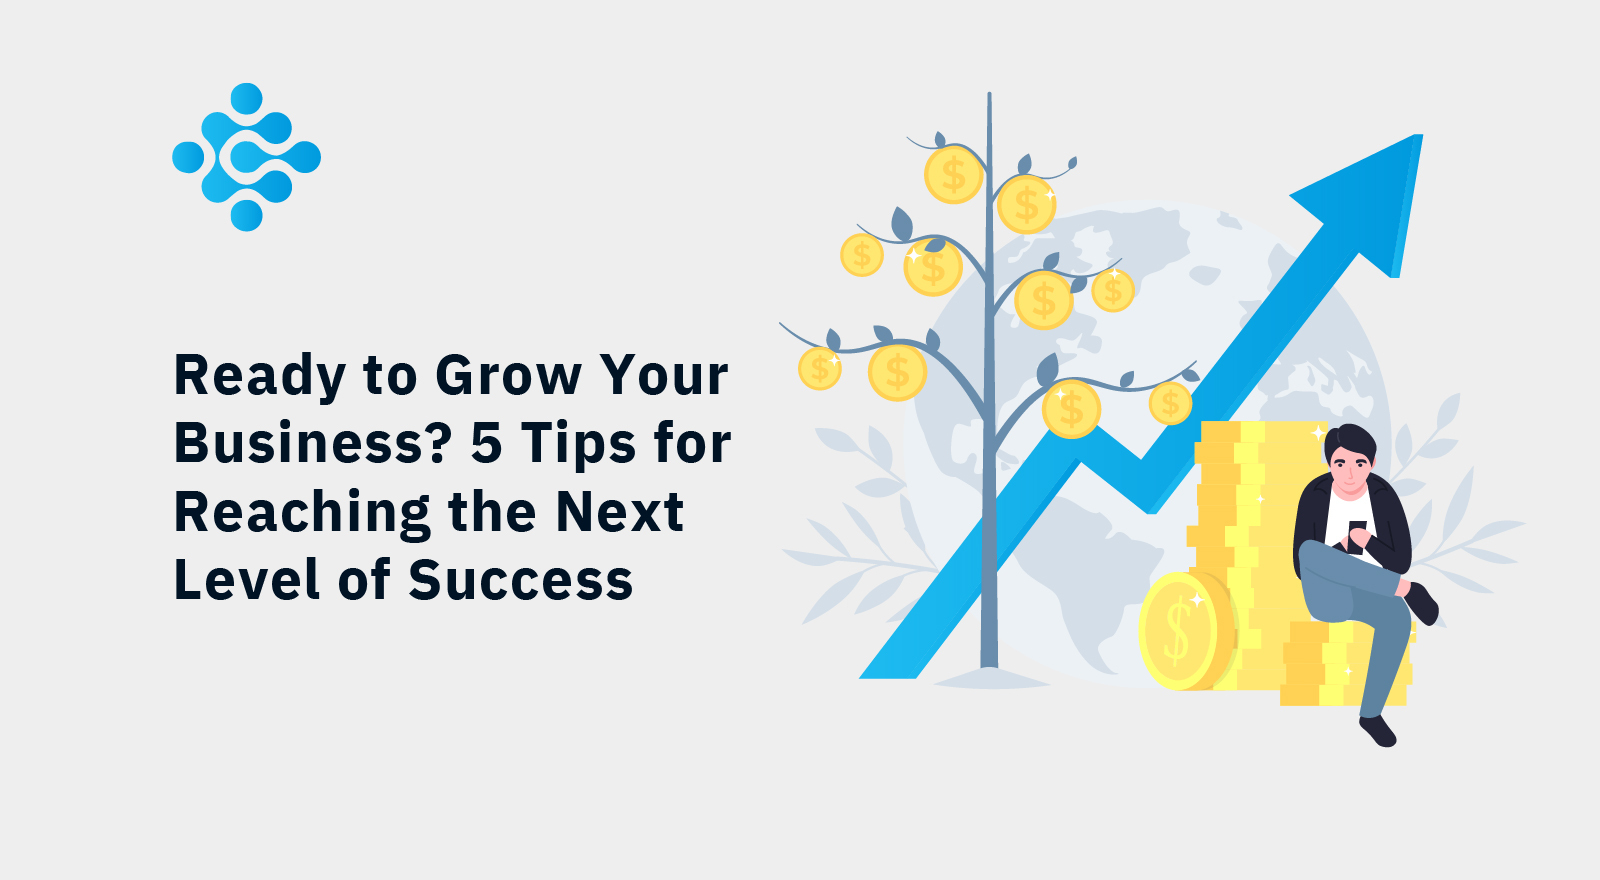 Ready to Grow Your Business? 5 Tips for Reaching the Next Level of Success